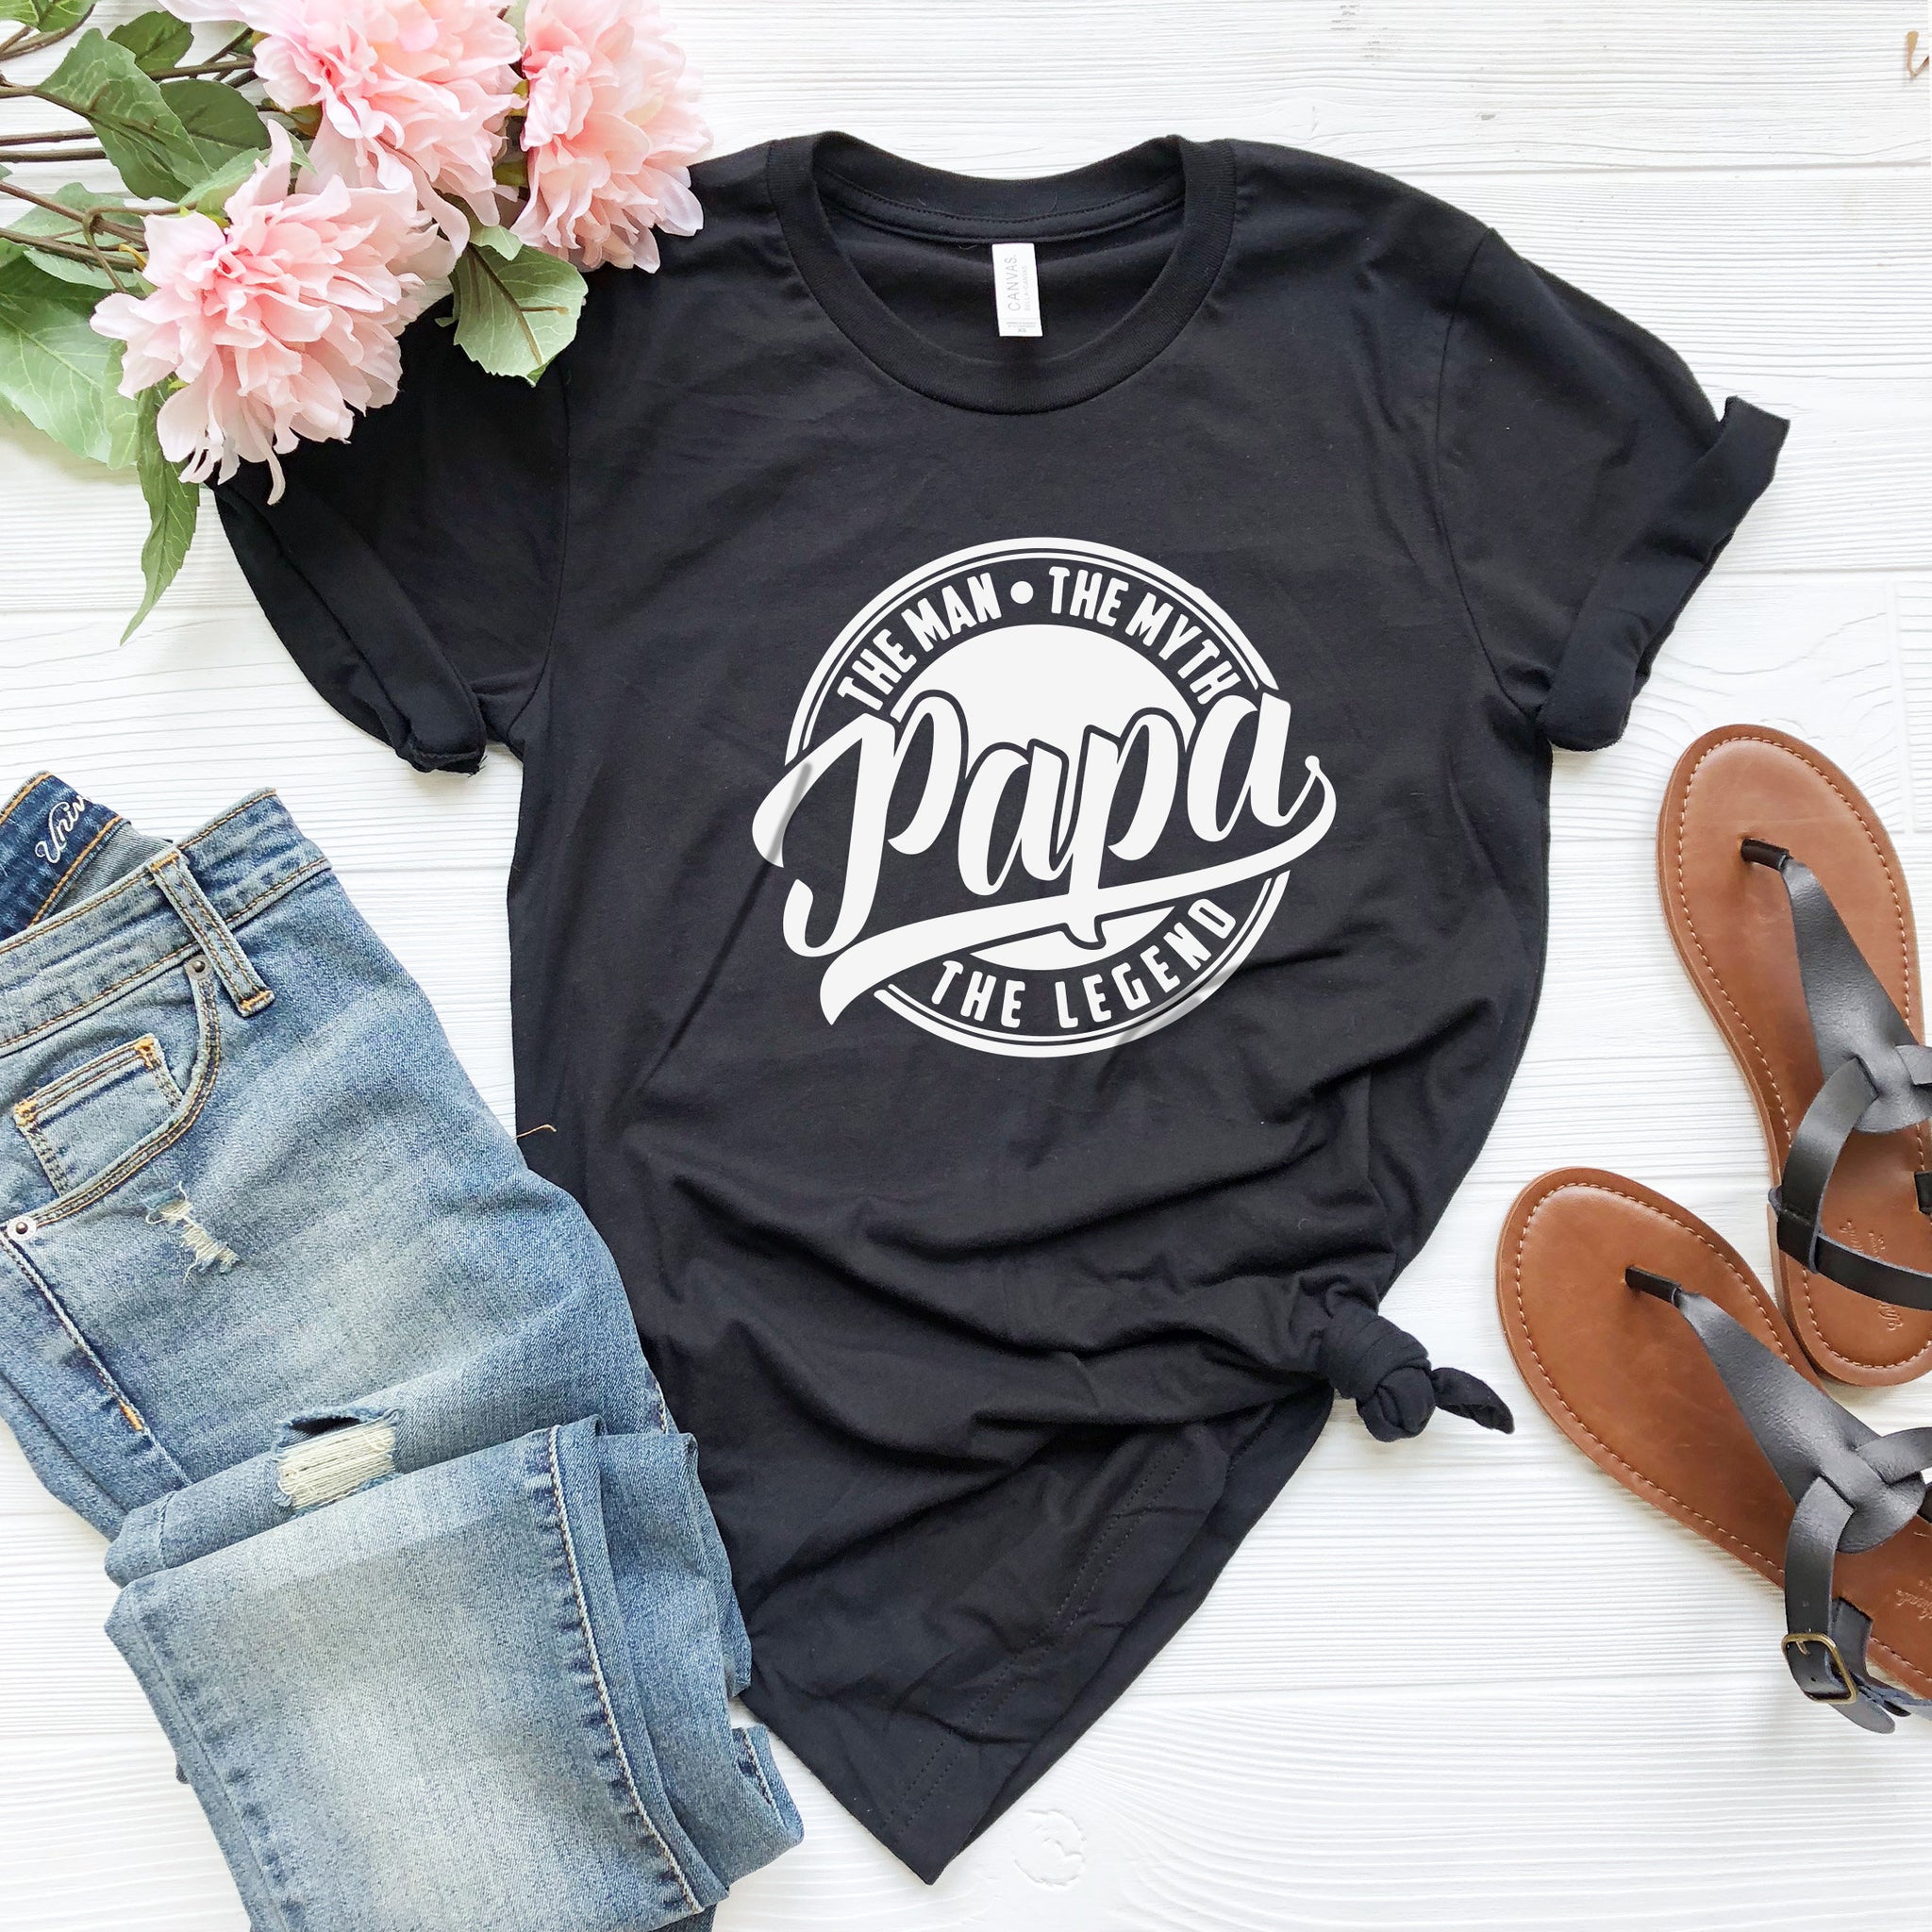 Funny Dad Tshirts for Fathers Day, Dad gift shirts, Dad shirts from daughter, Funny Shirts for dad men husband,Dad Birthday, Shirt for papa - Fastdeliverytees.com